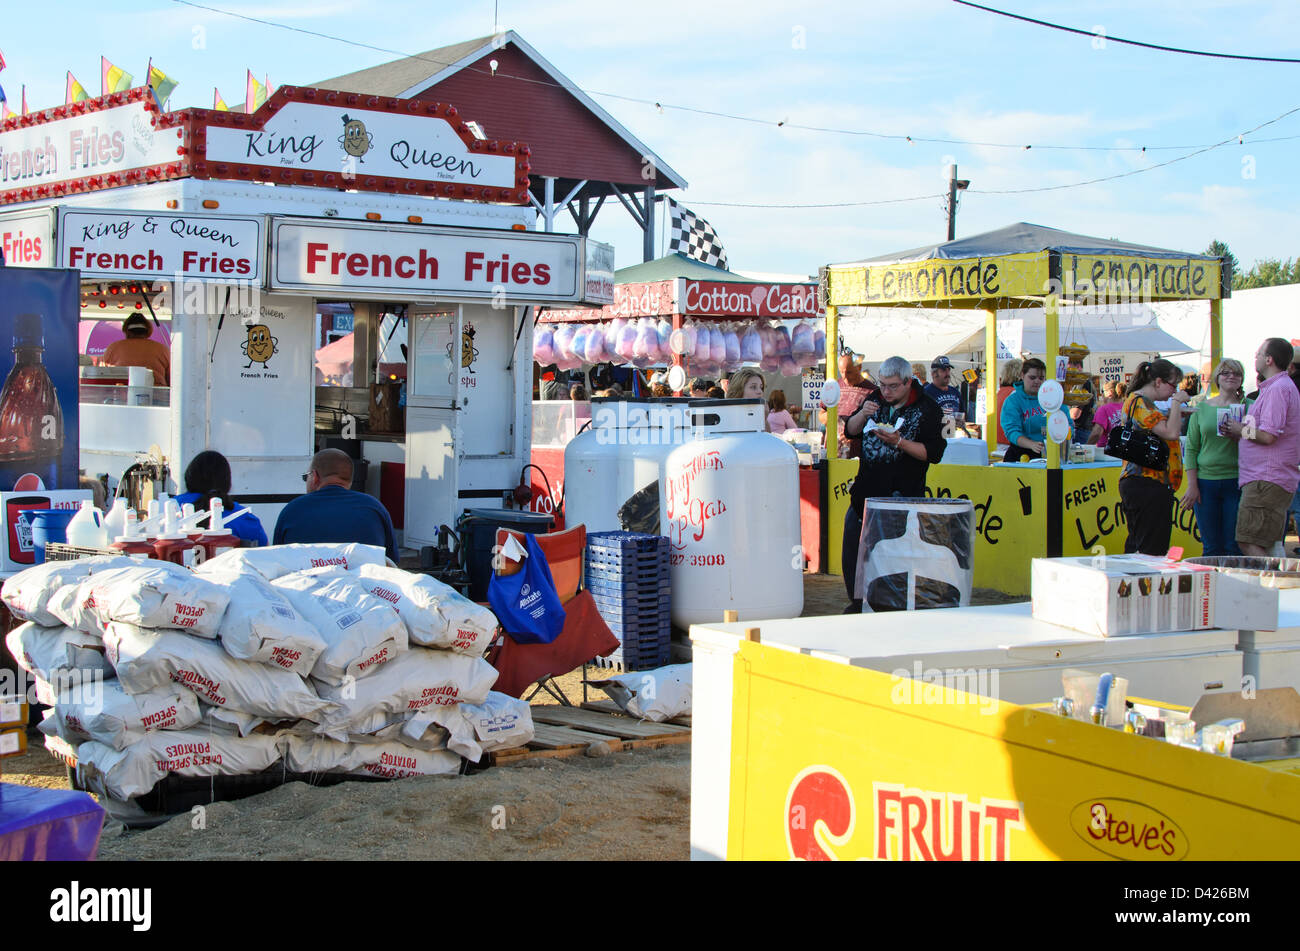 Behind the scenes at the fair - stacked bags of potatoes, propane tanks, gallons of ketchup, and other supplies. Stock Photo